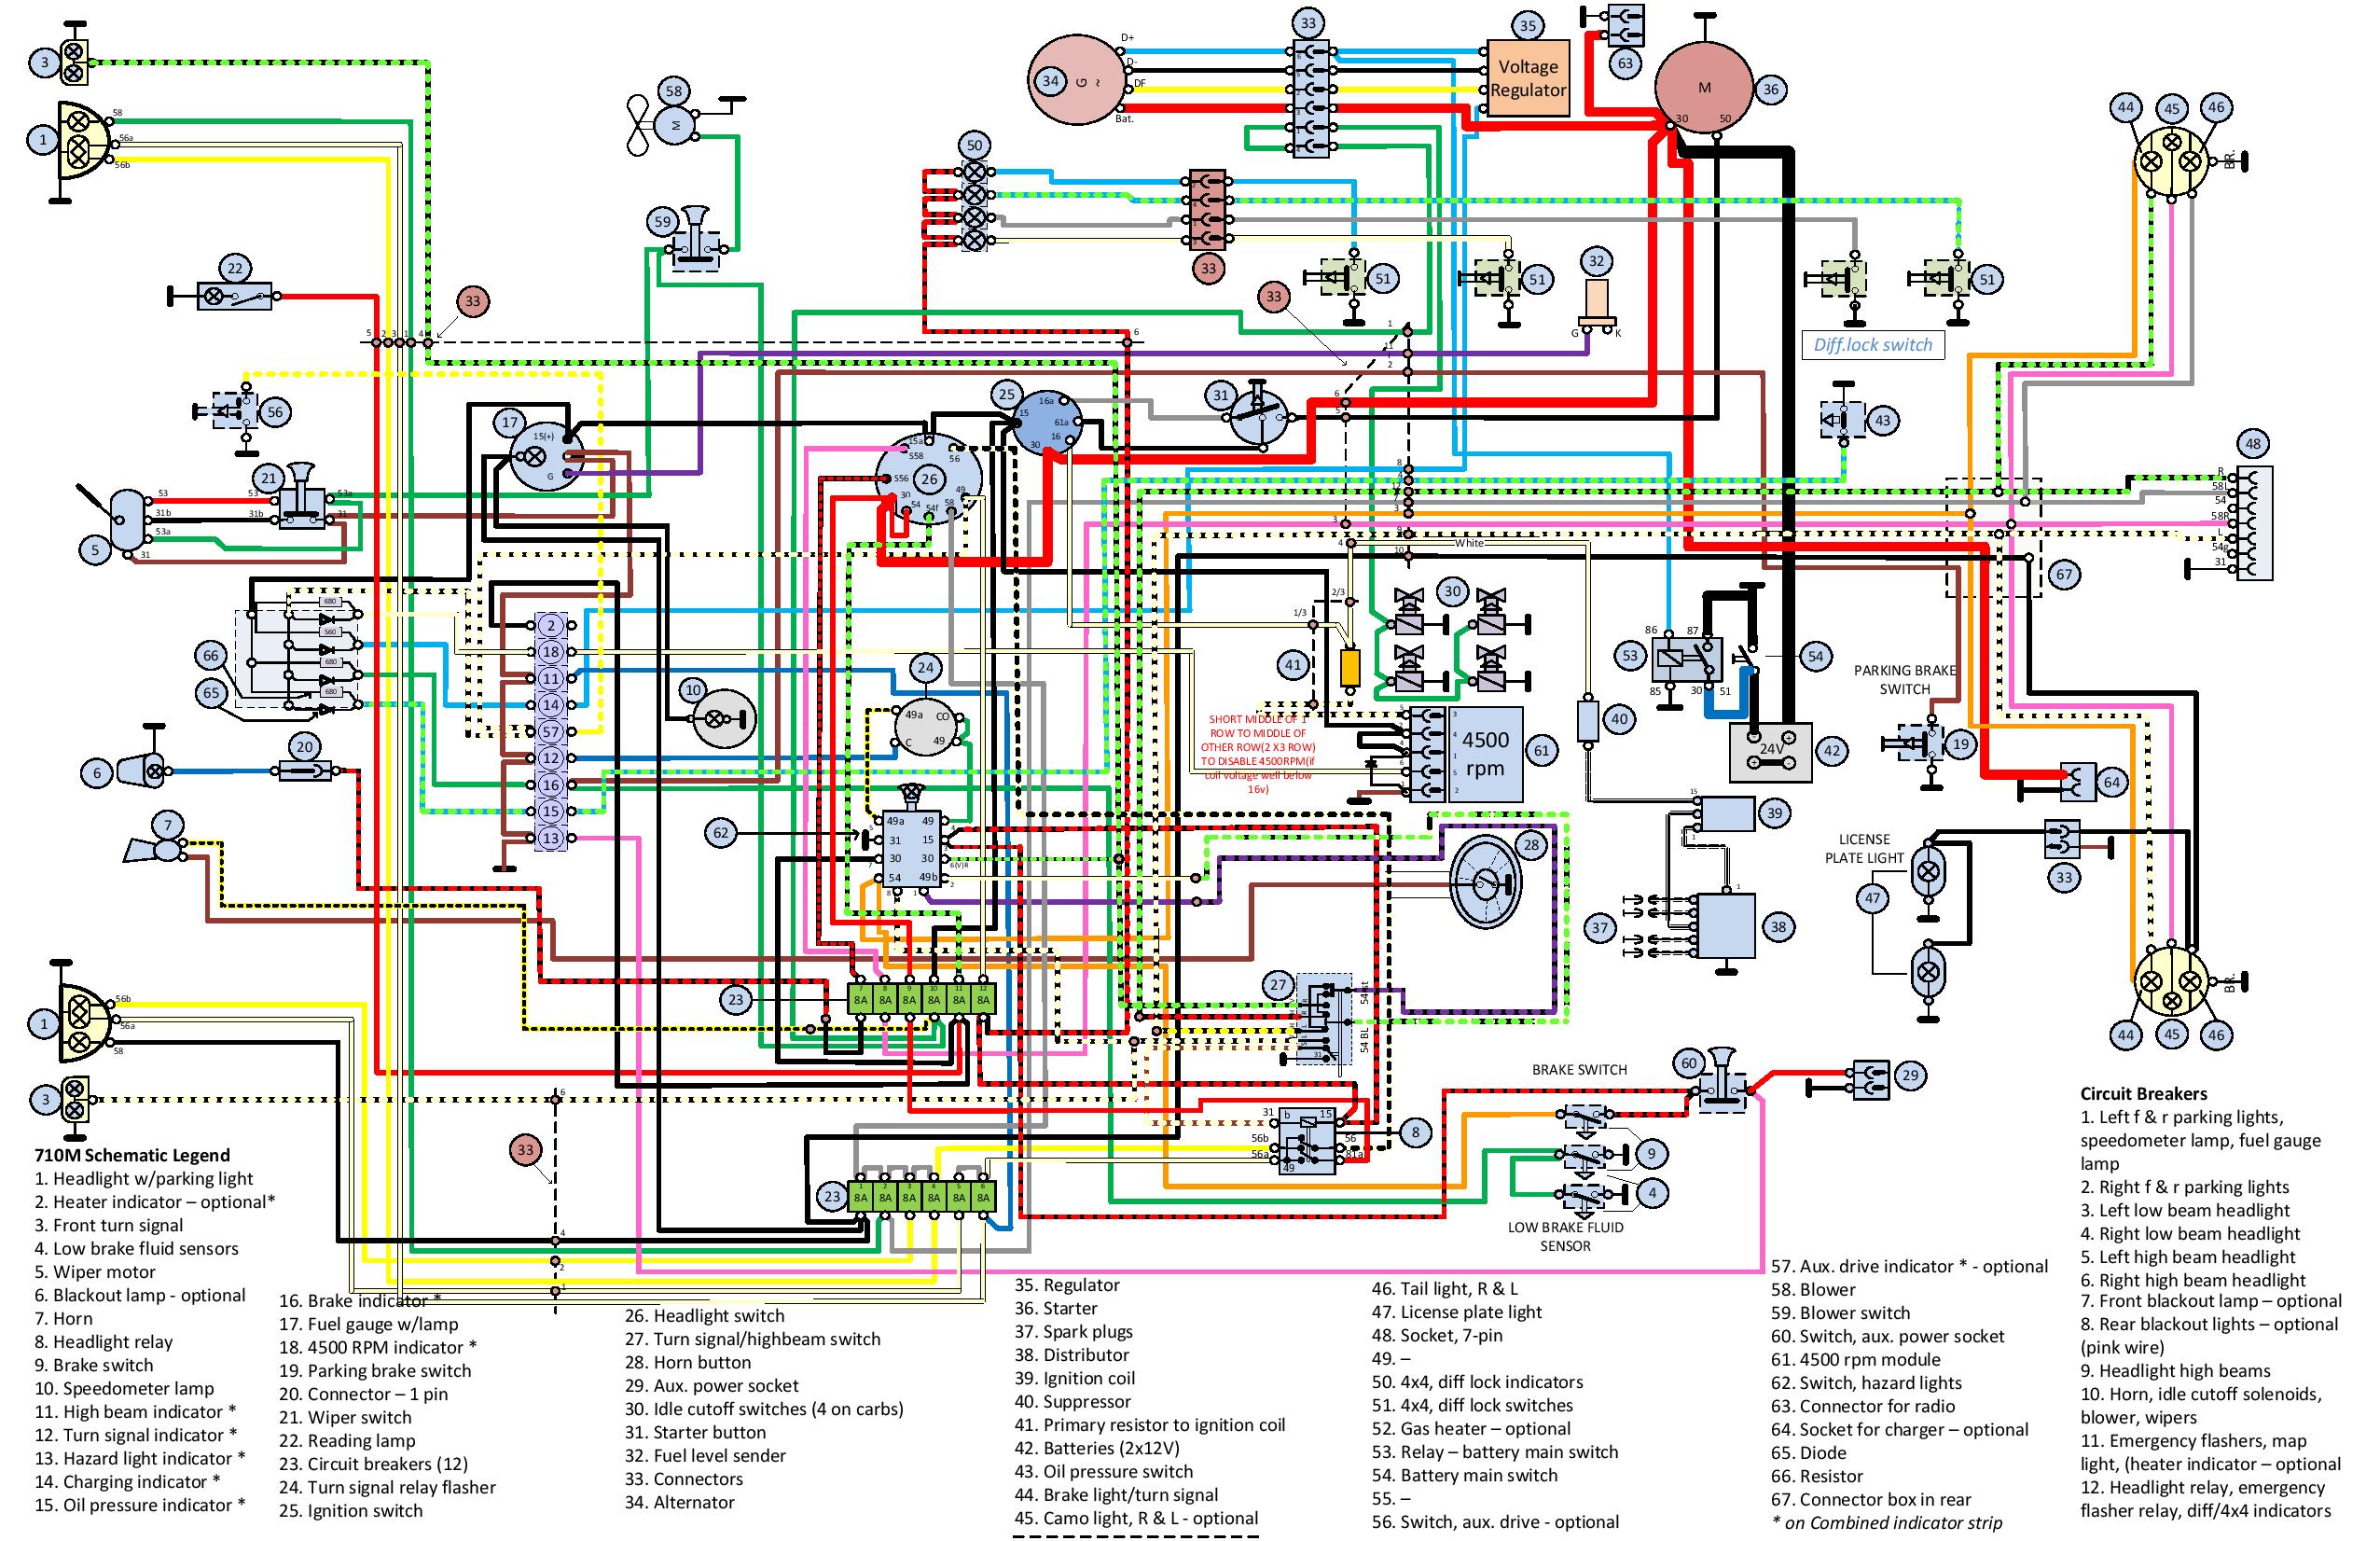 pinz color wiring-page-001(1).jpg